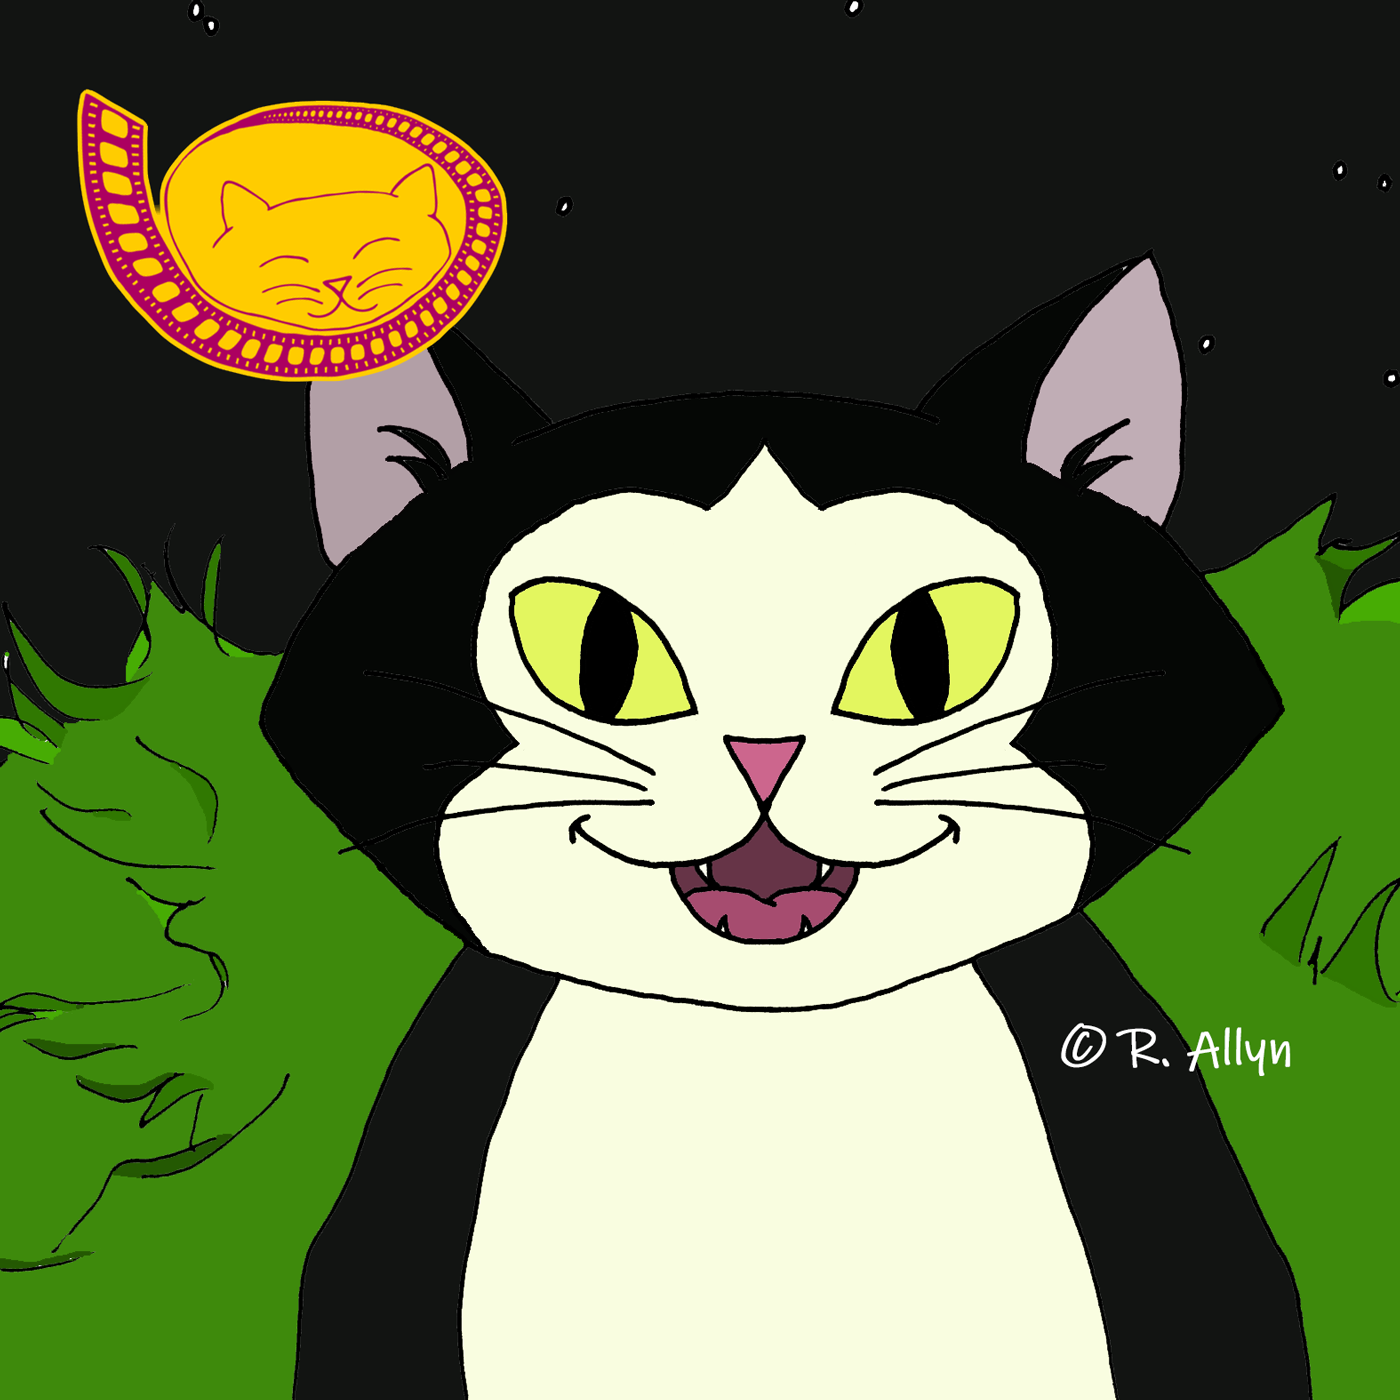 Illustration of Darwin the cat on the moon from the movie April and the Extraordinary World